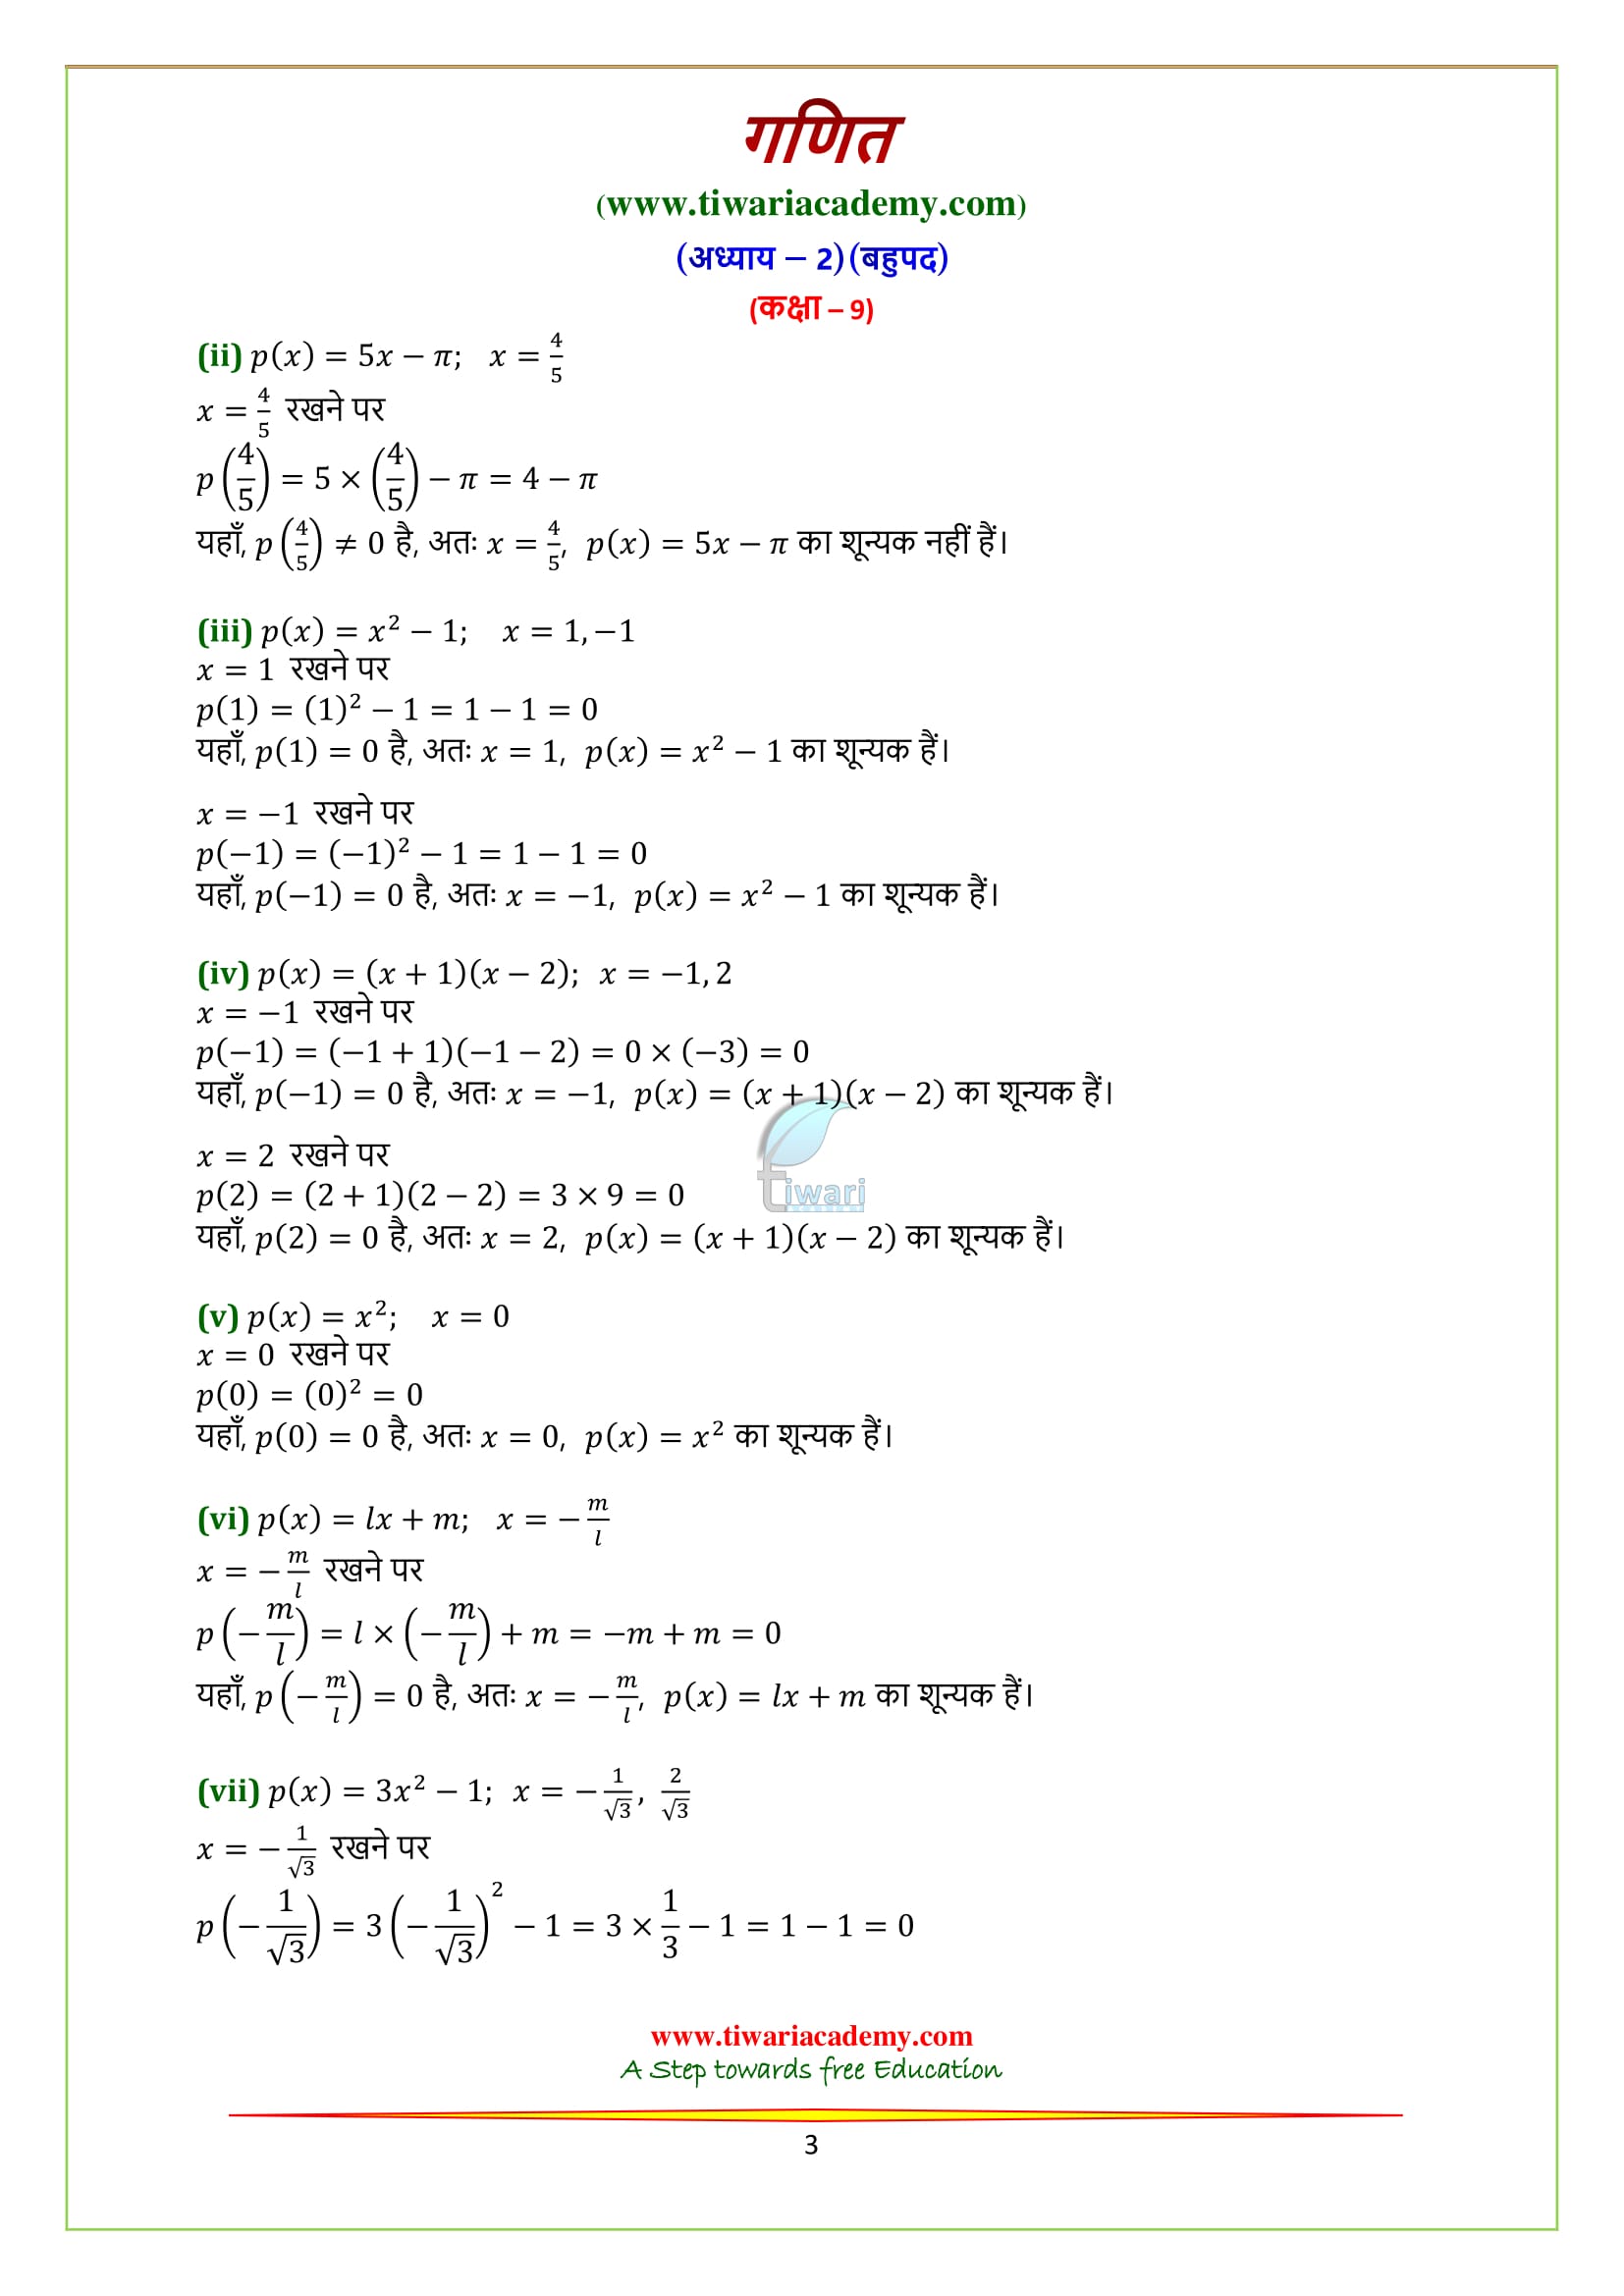 NCERT Solutions for class 9 Maths chapter 2 polynomials